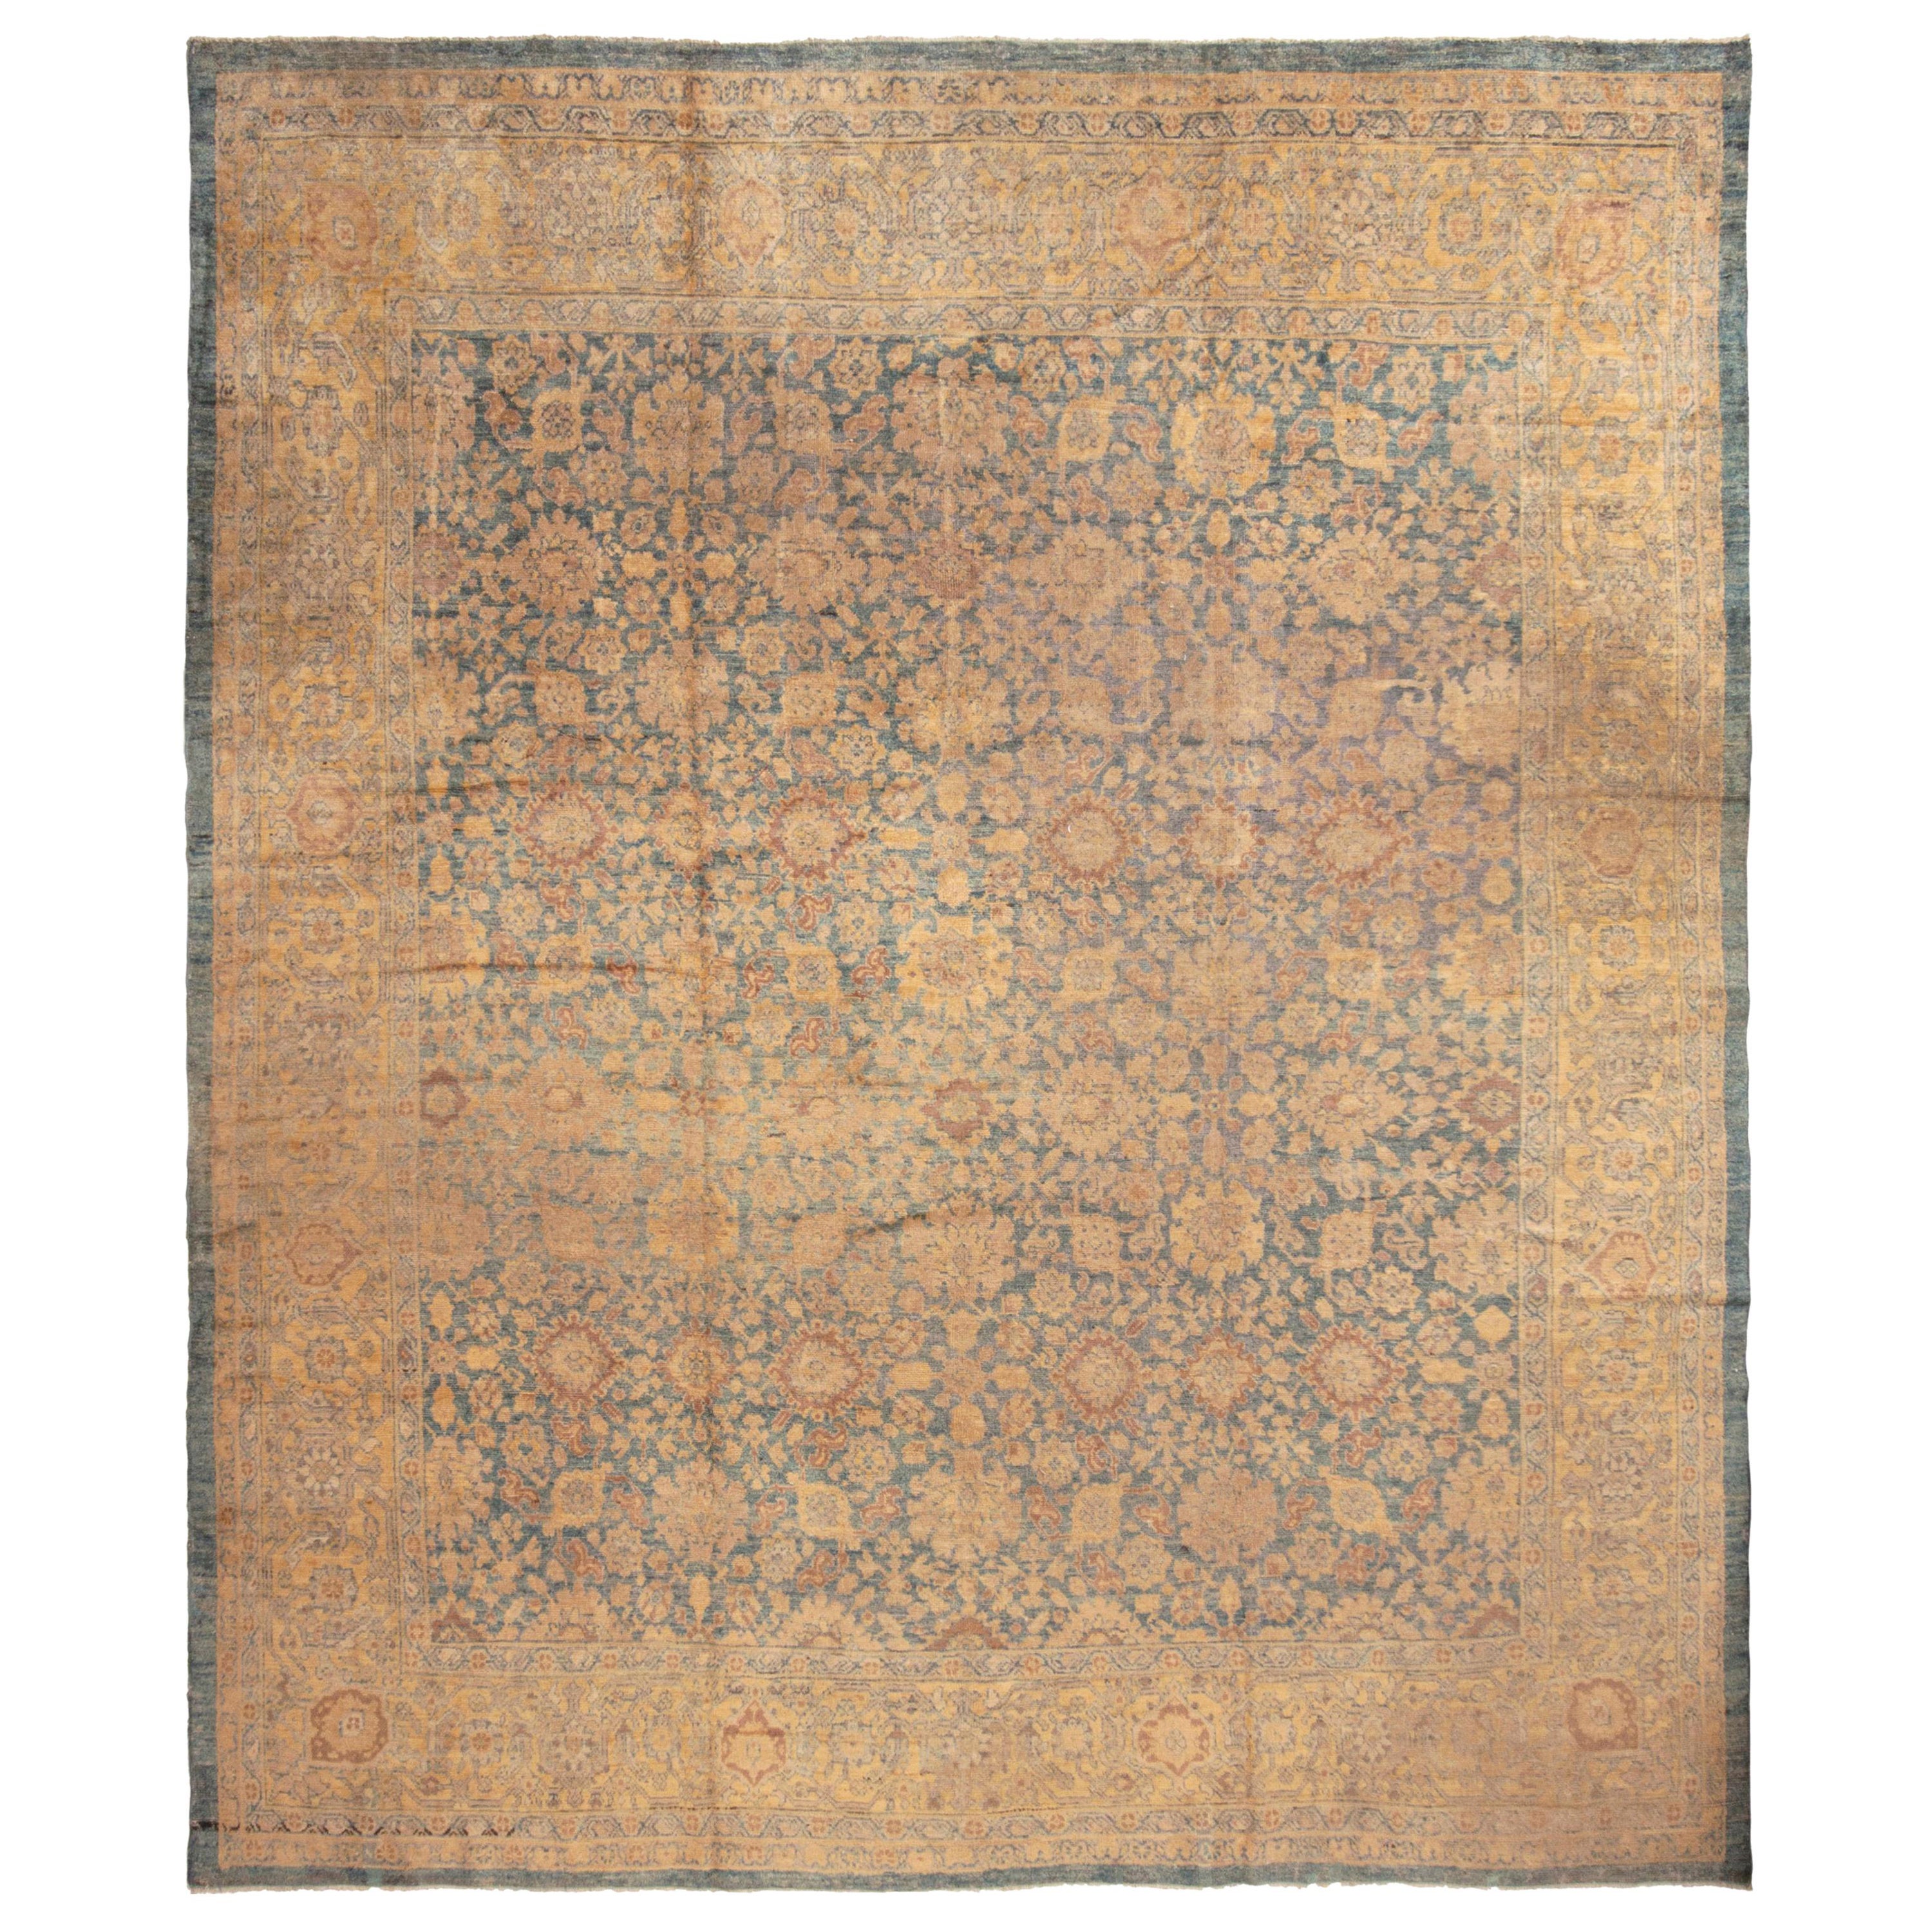 Antique Sultanabad Blue Wool Rug with All-Over Floral Pattern